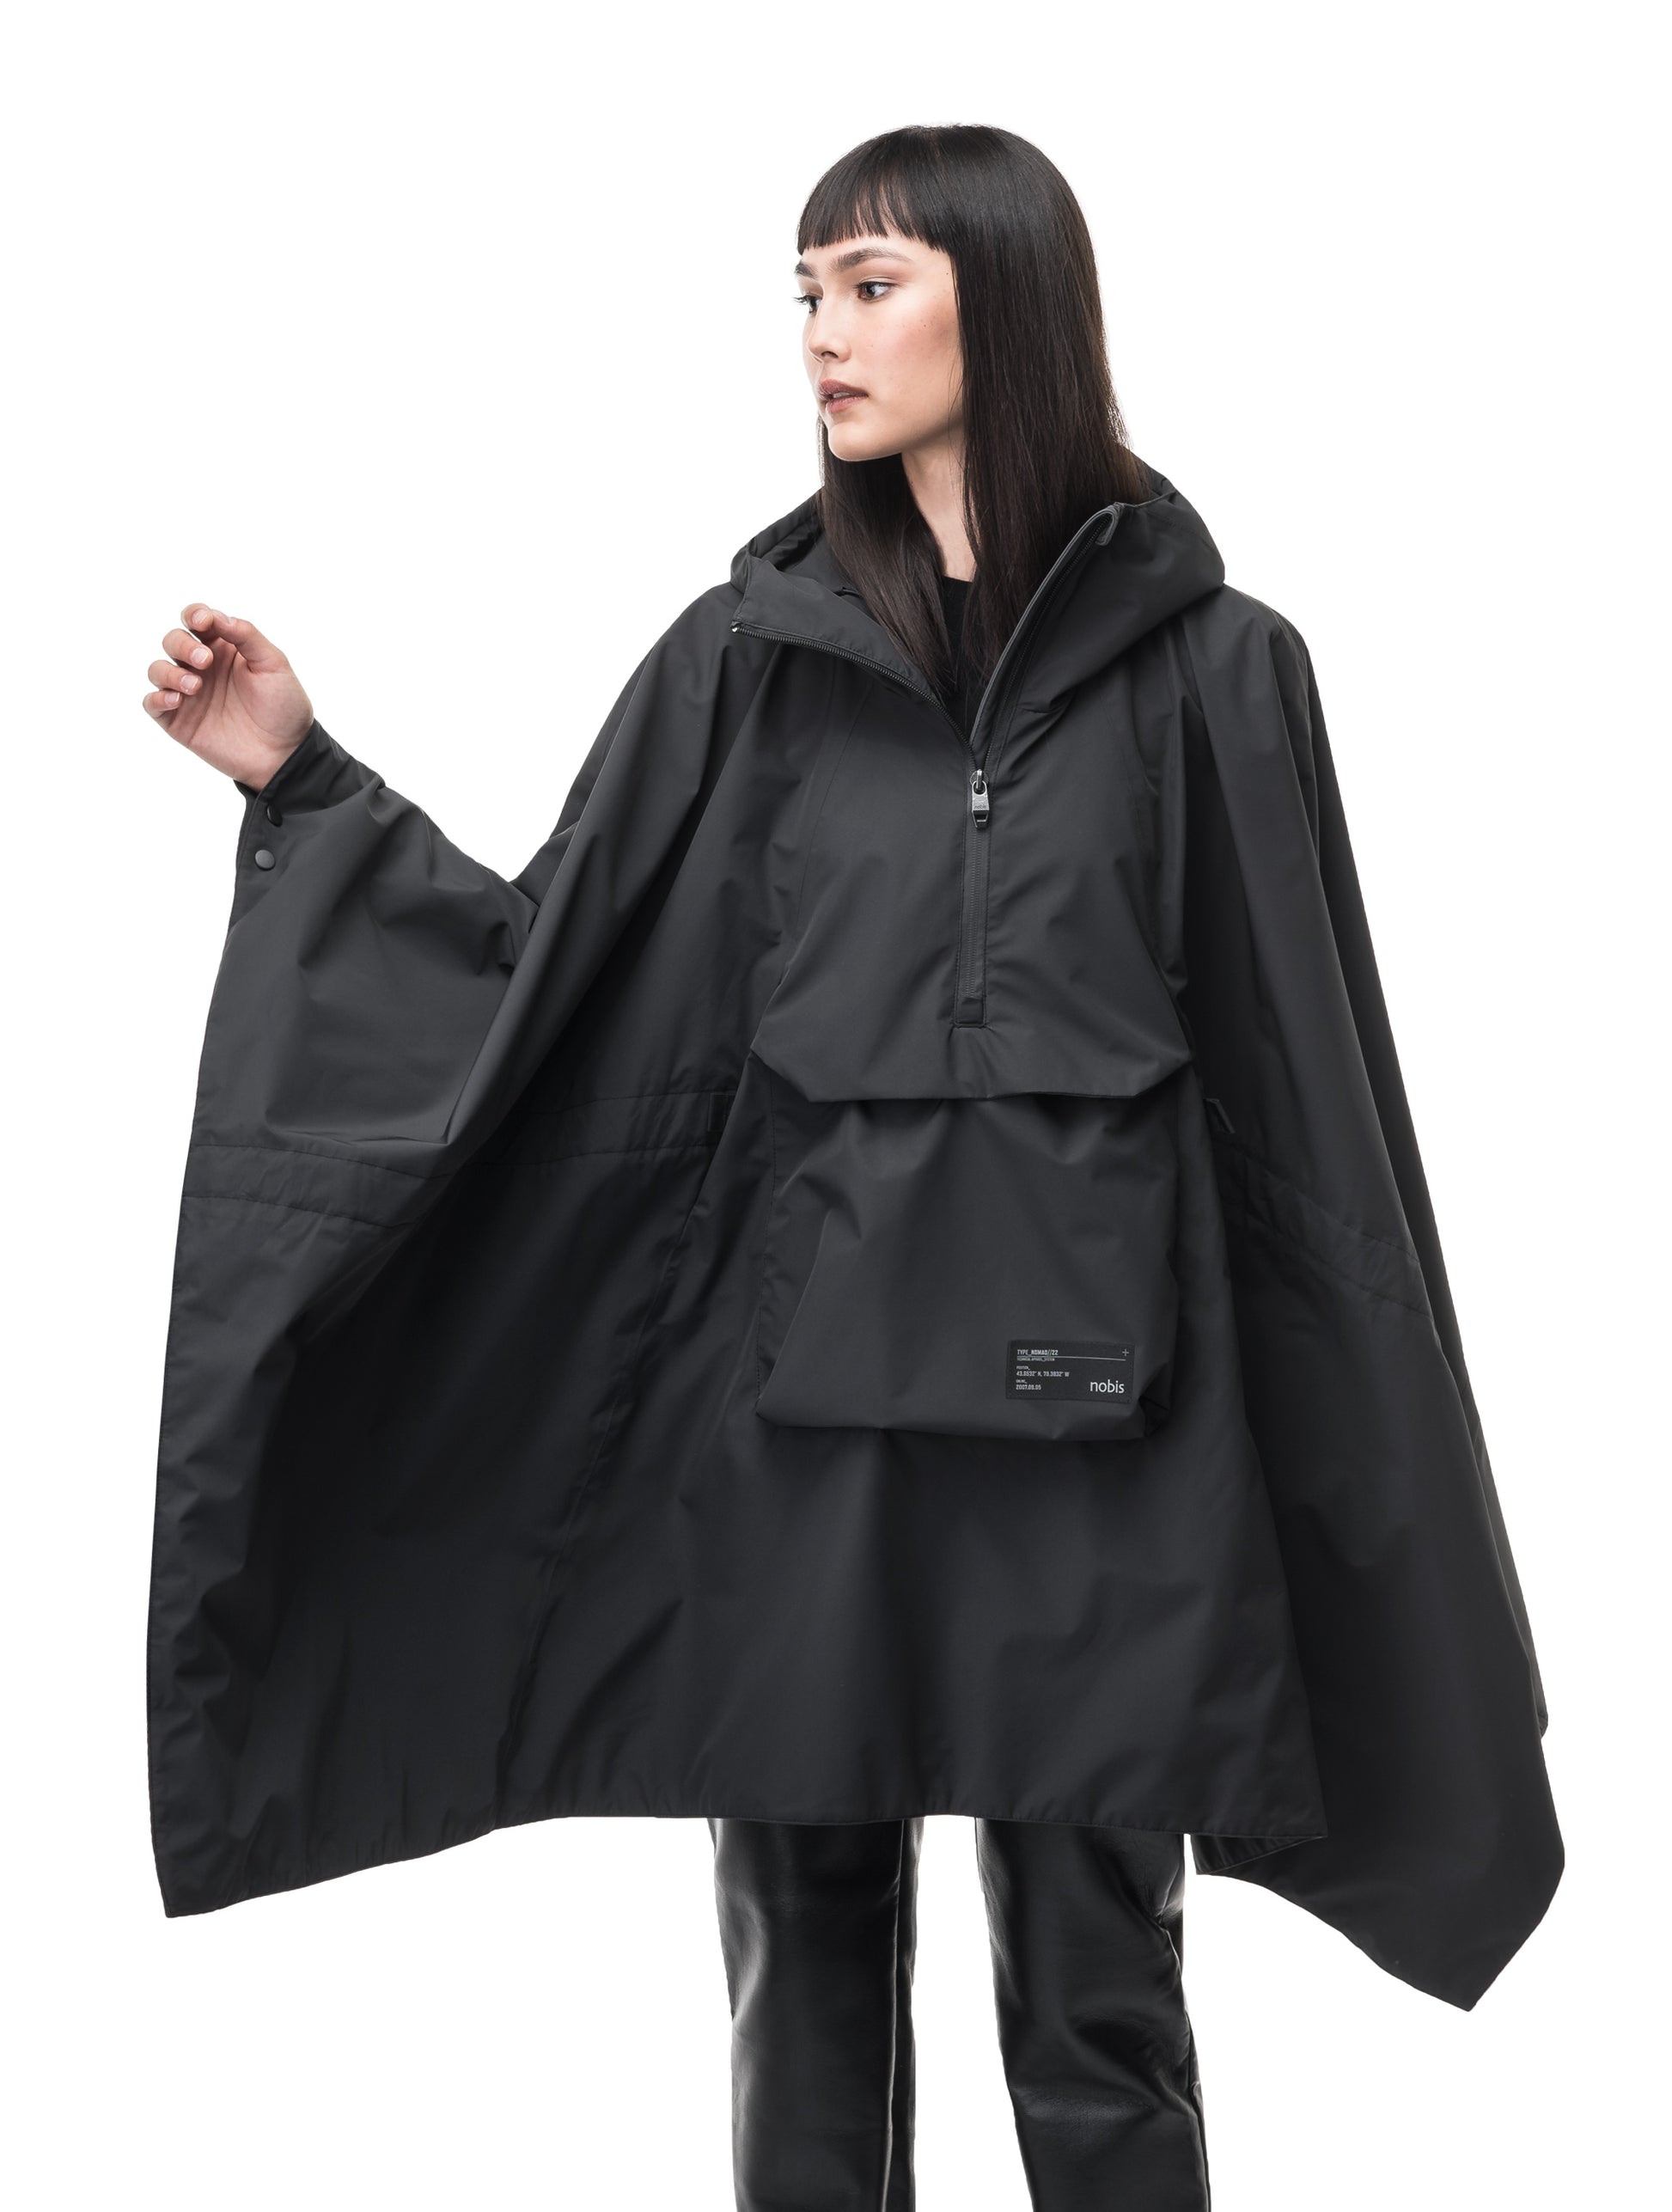 Hydra Unisex Performance Poncho in thigh length, non-removable hood, vertical half-zipper along centre front collar, hidden side-entry waist zipper pockets, adjustable webbing straps and snap closure cuffs, and packable to front kangaroo pocket with flap opening, in Black